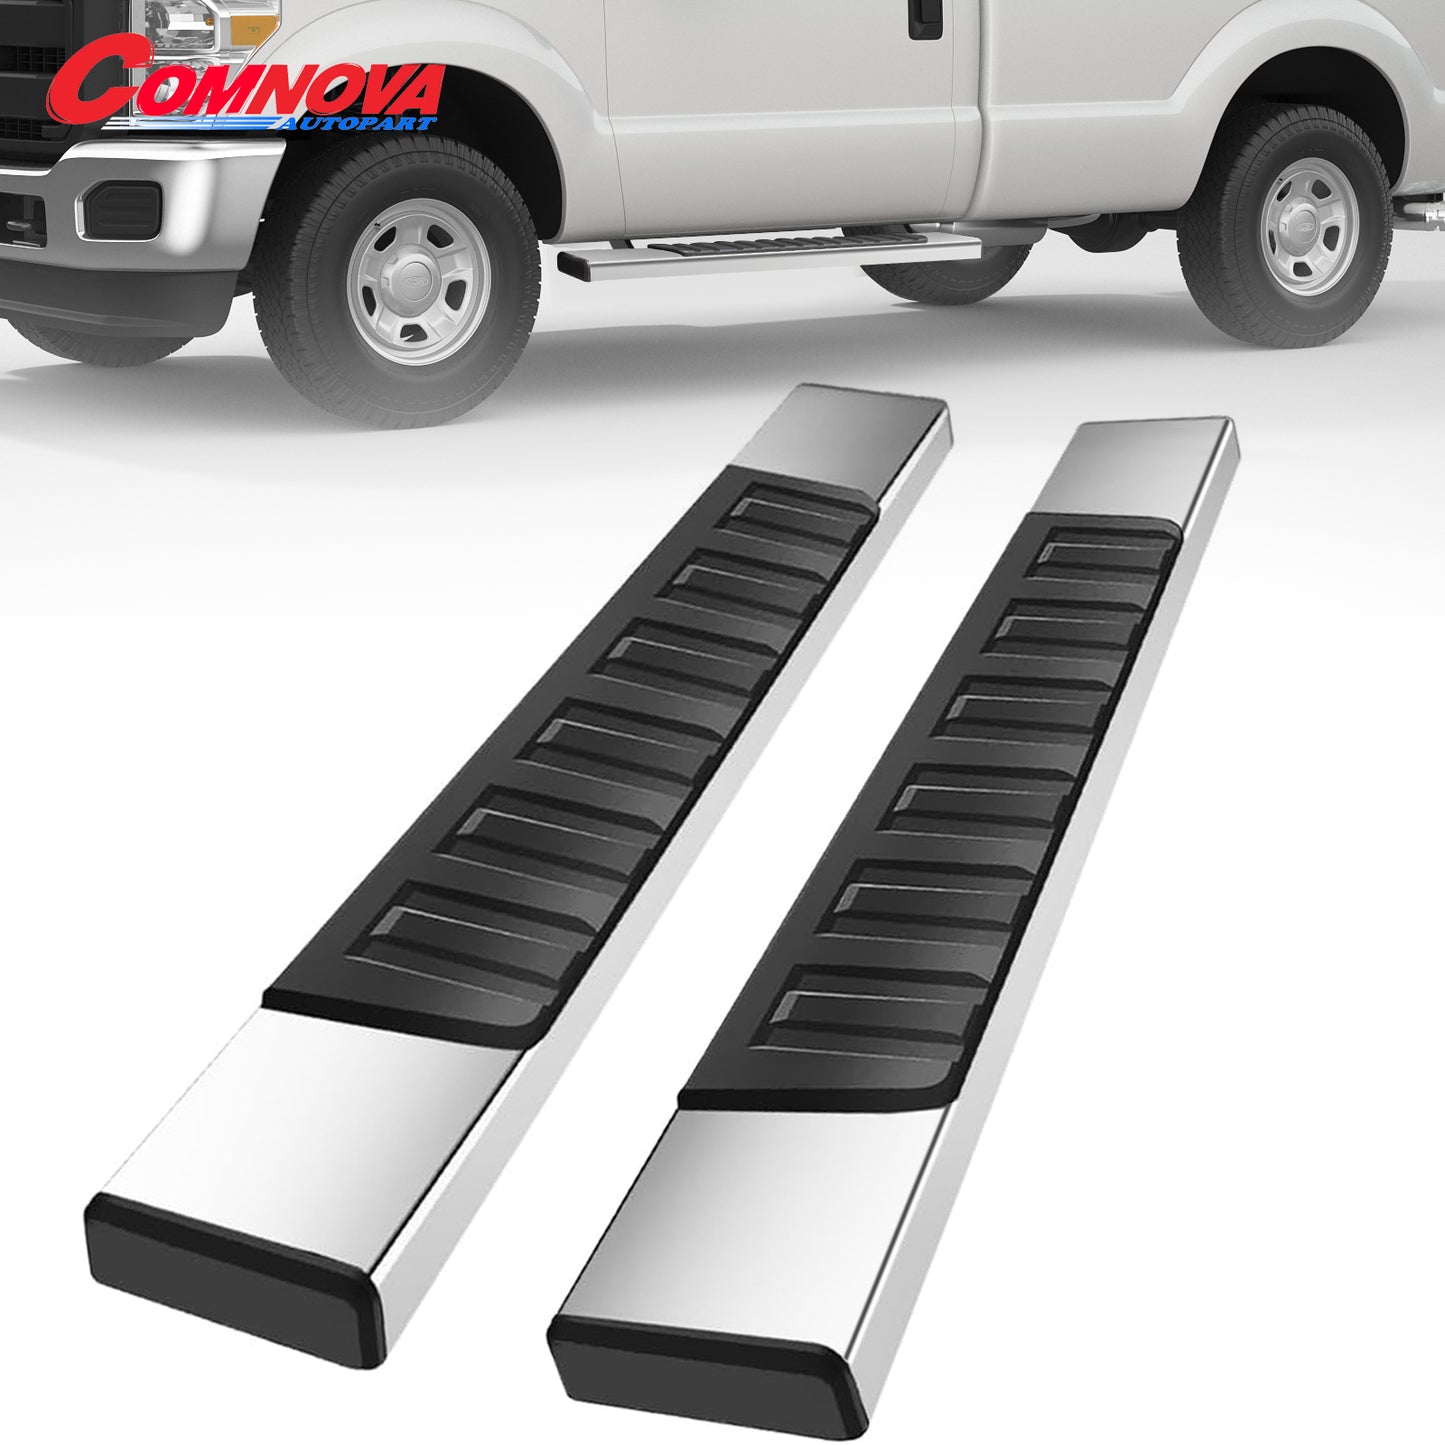 Running Boards Compatible with 1999-2016 Ford F250 F350 Superduty Regular Cab H6 Style. - COMNOVA AUTOPART